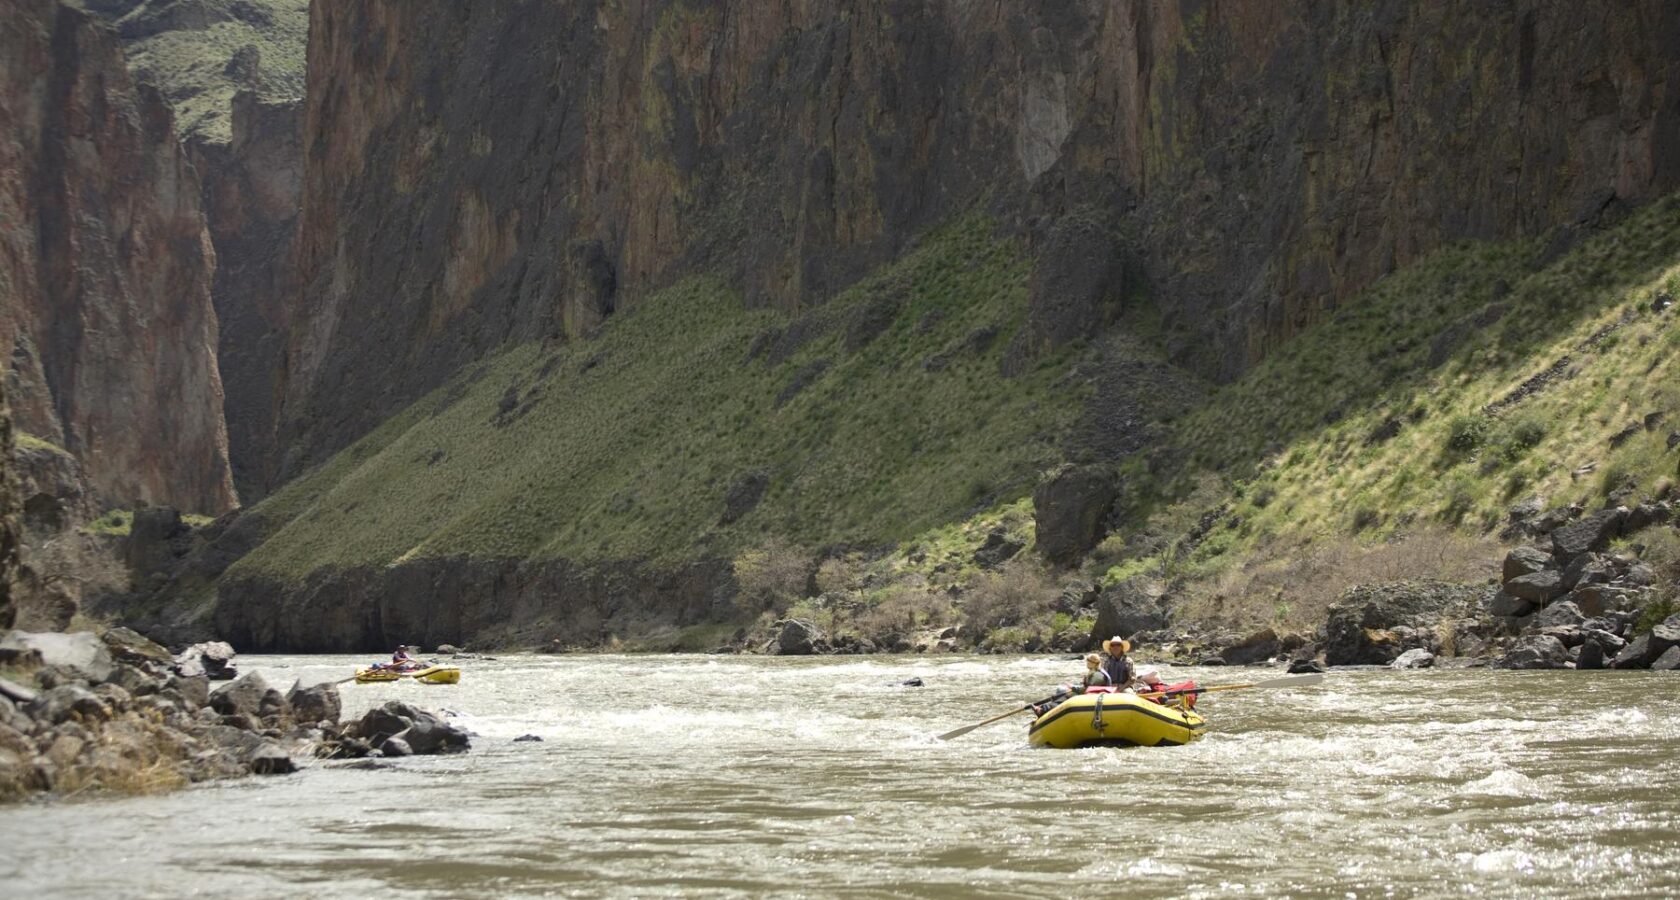 Owyhee rafting trip in southeastern Oregon with the outfitter OARS